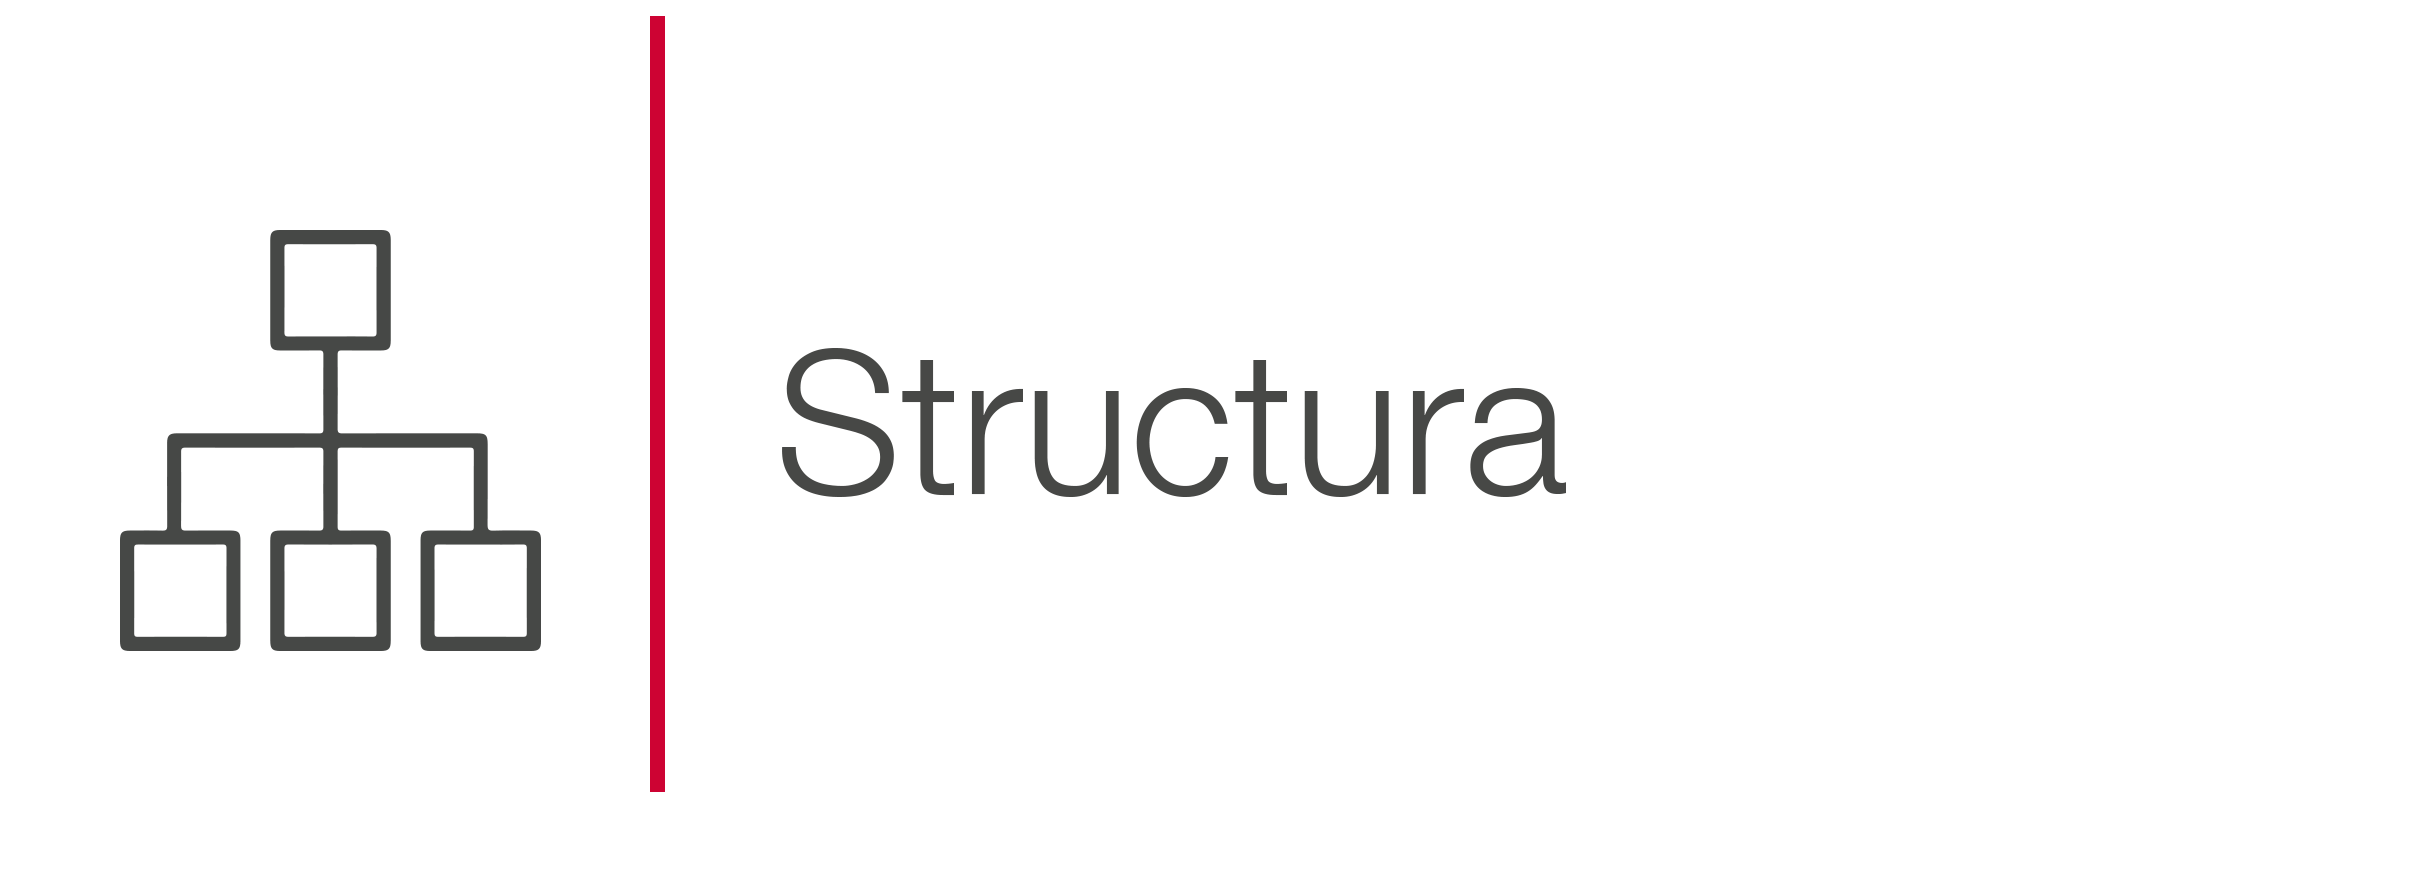 Structura.png